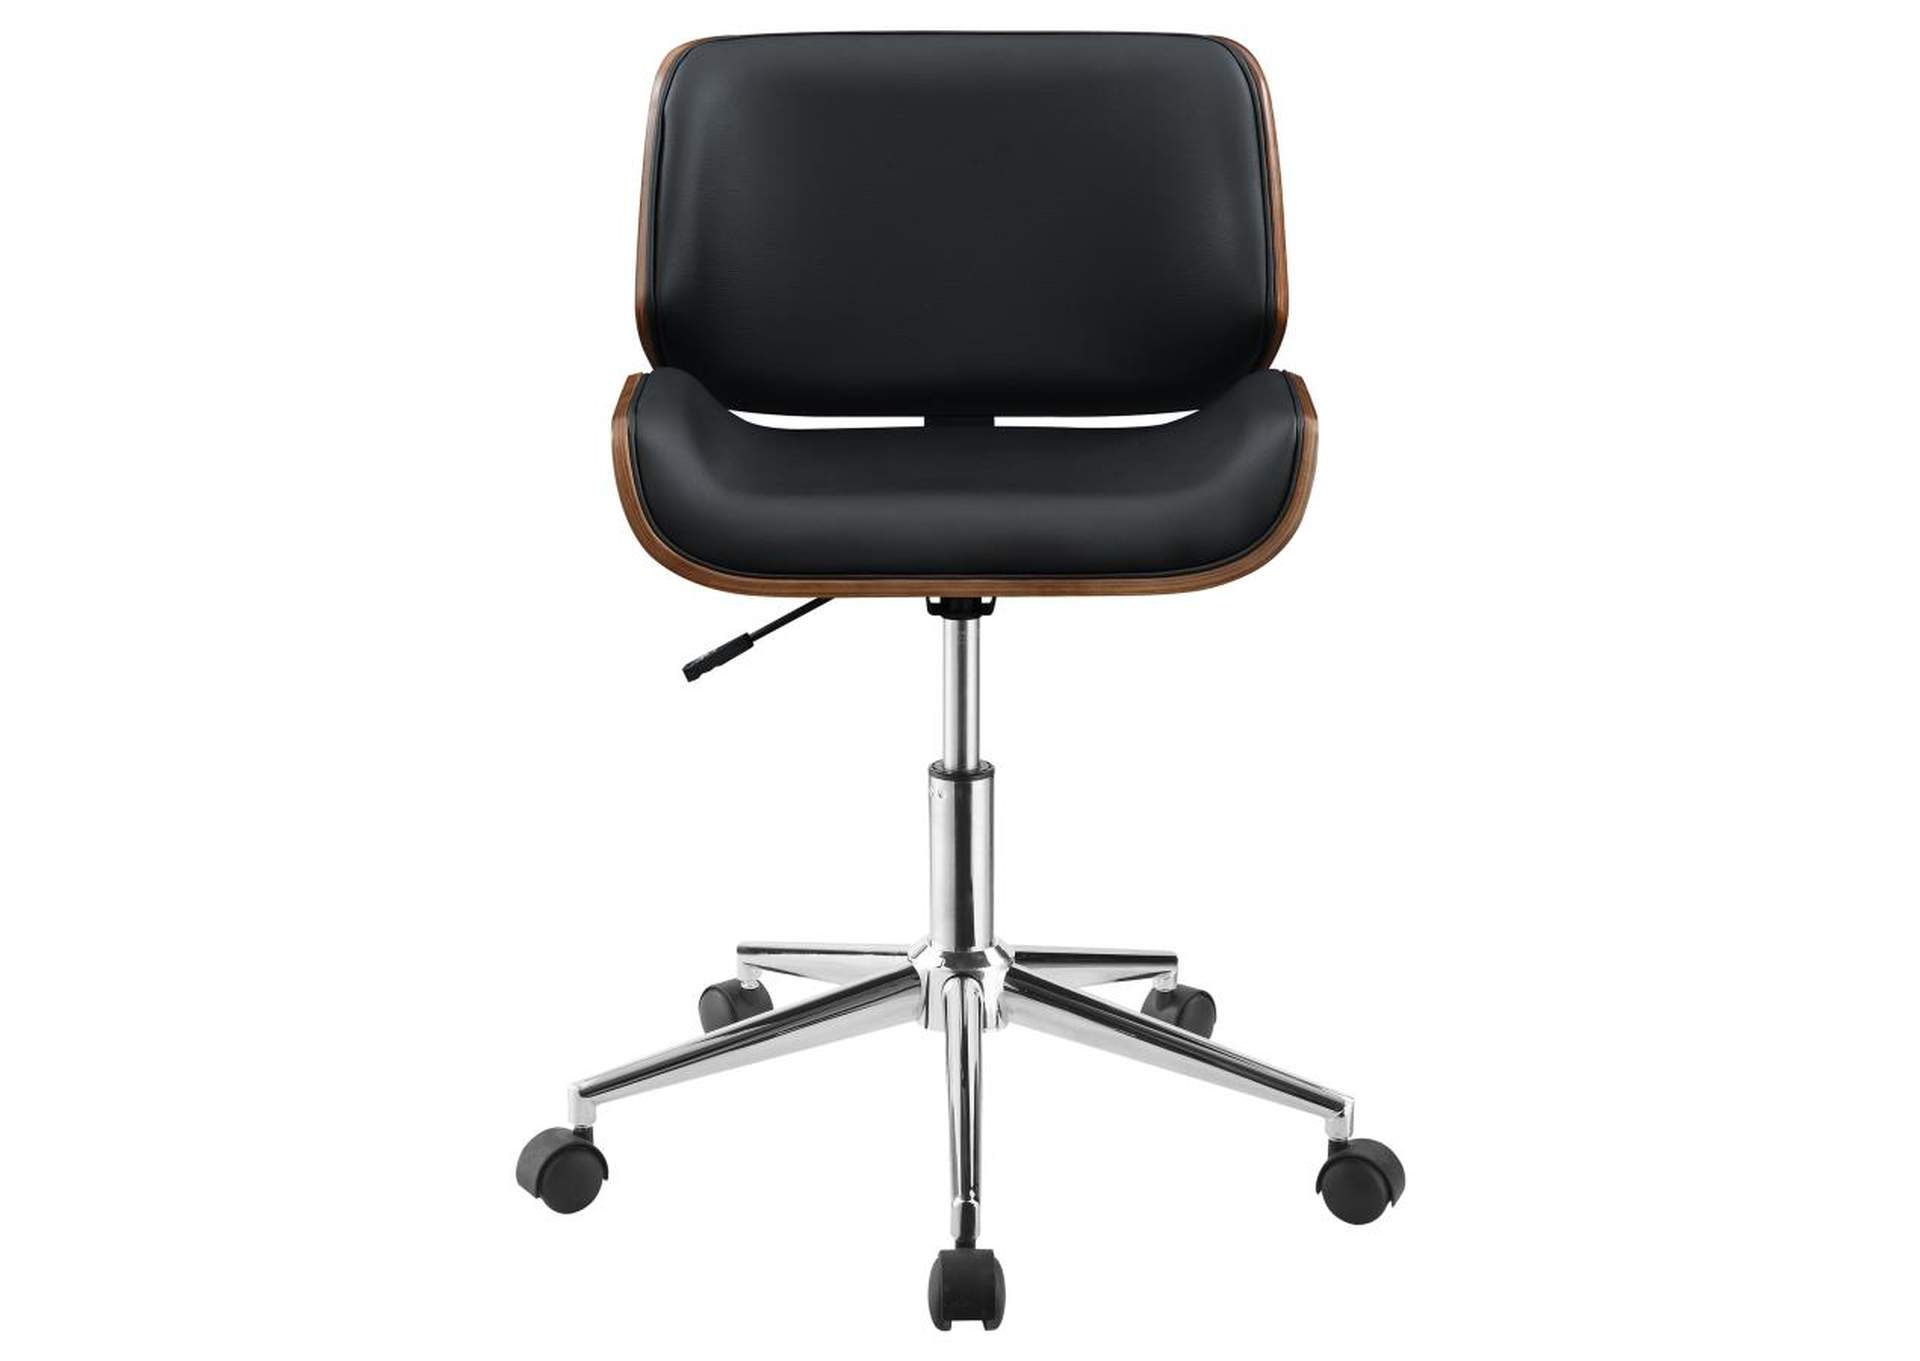 Adjustable Height Office Chair Black and Chrome,Coaster Furniture